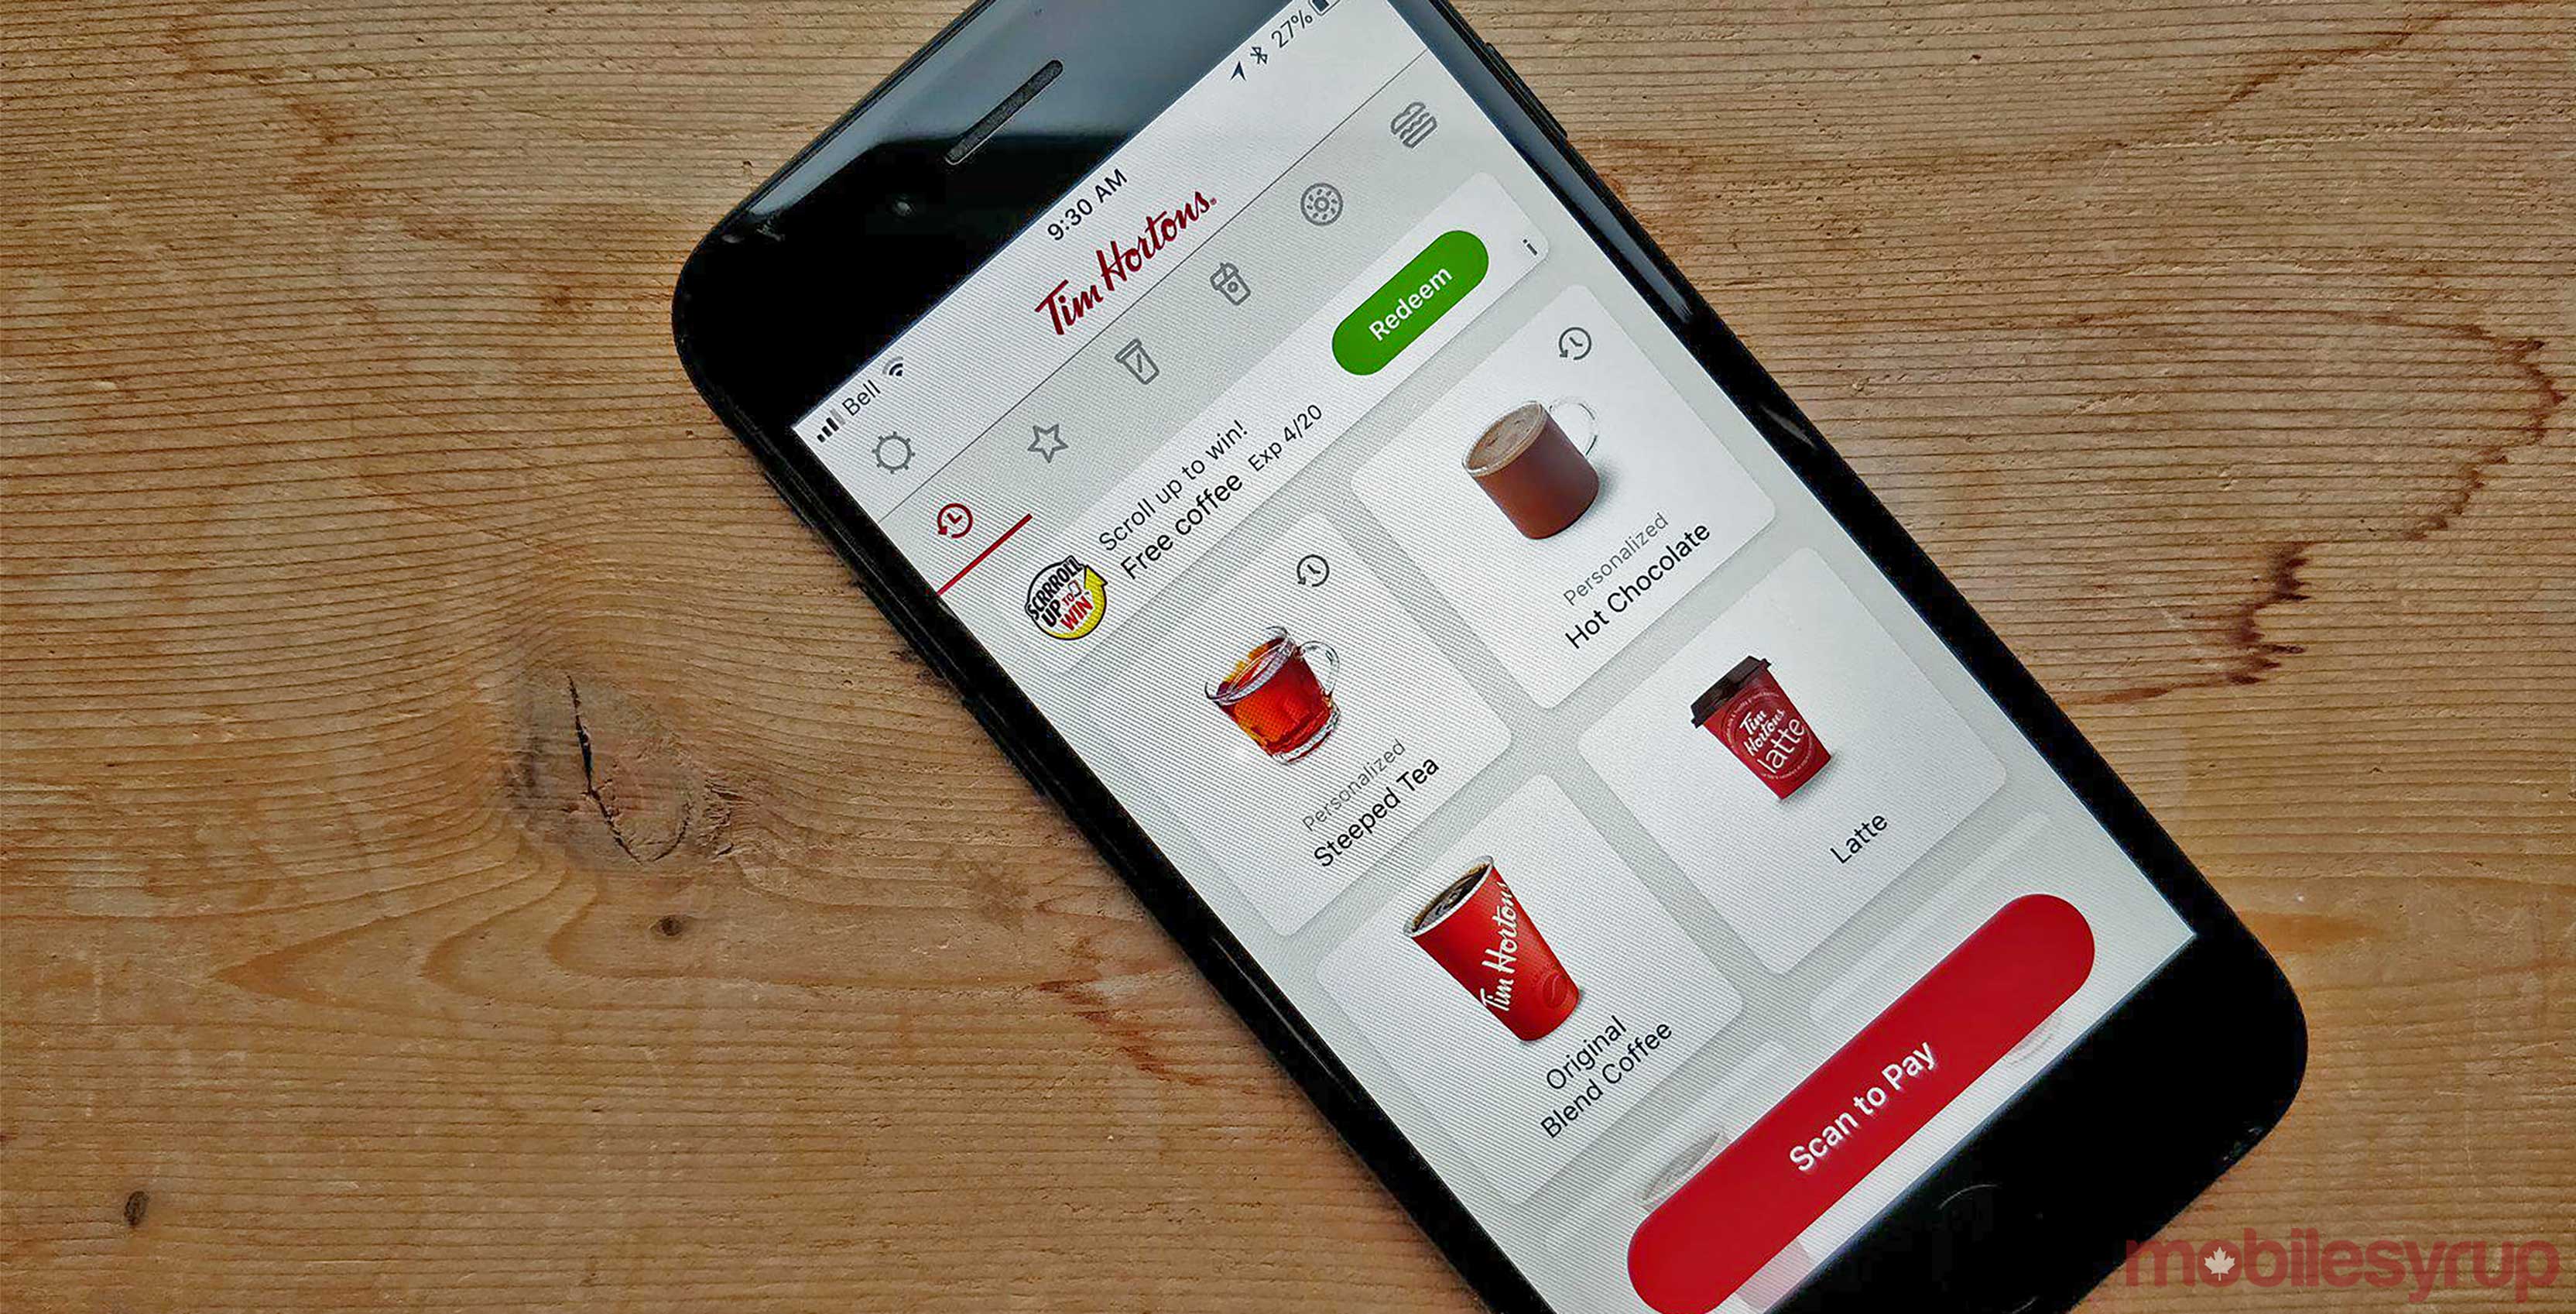 Tim Hortons scroll up to win feature